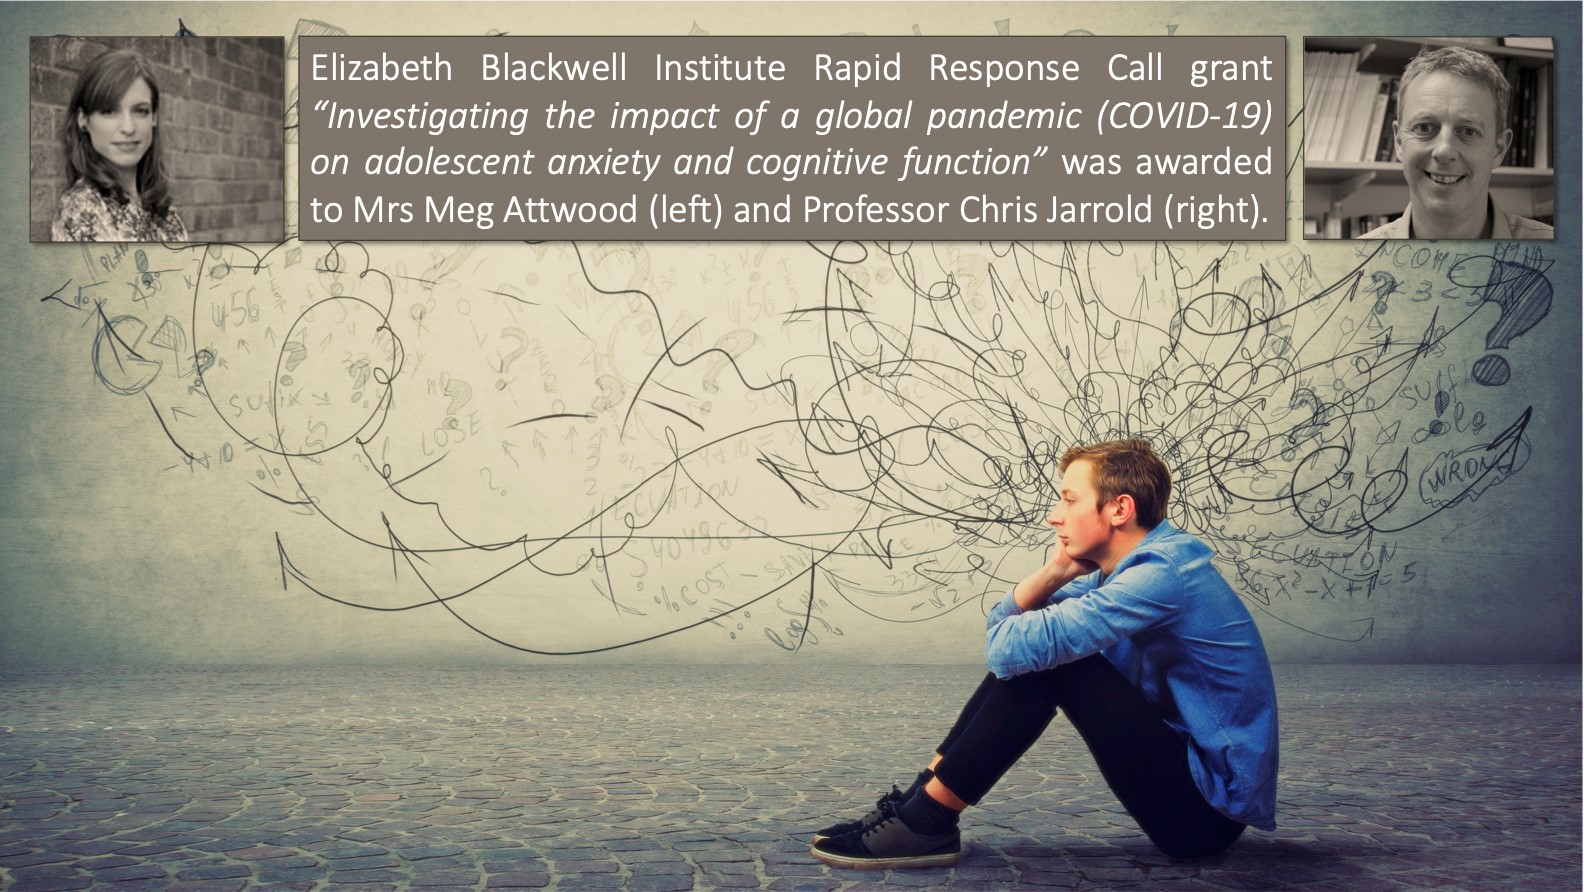 An Elizabeth Blackwell Institute Rapid Response call grant, "Investigating the impact of a global pandemic (COVID-19) on adolescent anxiety and cognitive function" was awarded to Meg Attwood and Chris Jarrold (both pictured next to a young person surrounded by imagined swirls)